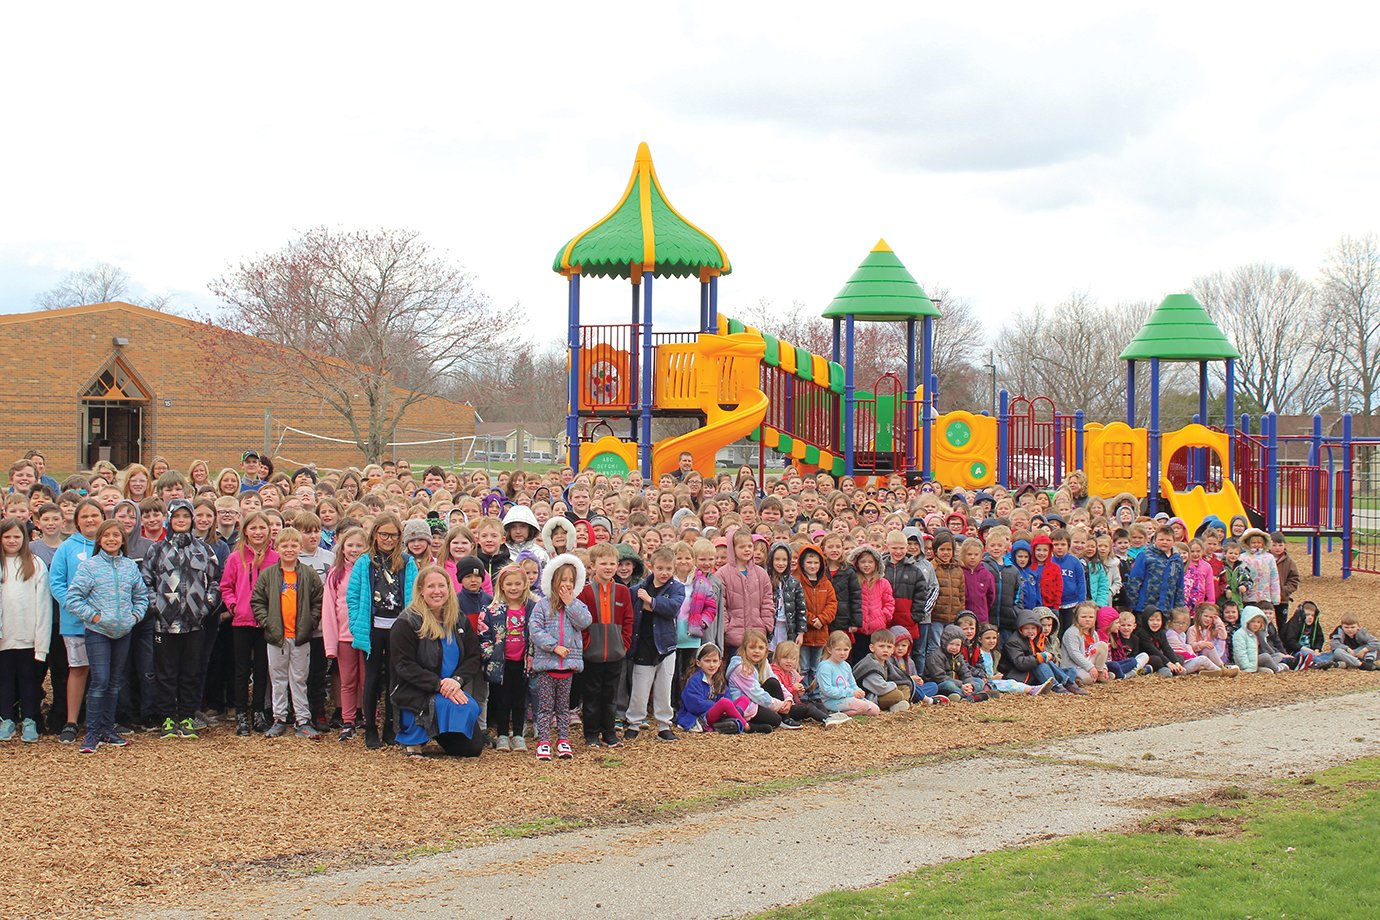 The entire student body at New Market Elementary yells “thank you” to the students, parents, teachers and sponsors who made Phase 1 possible, which saw to the installation of a new STEAM-based playground, installed earlier this week.